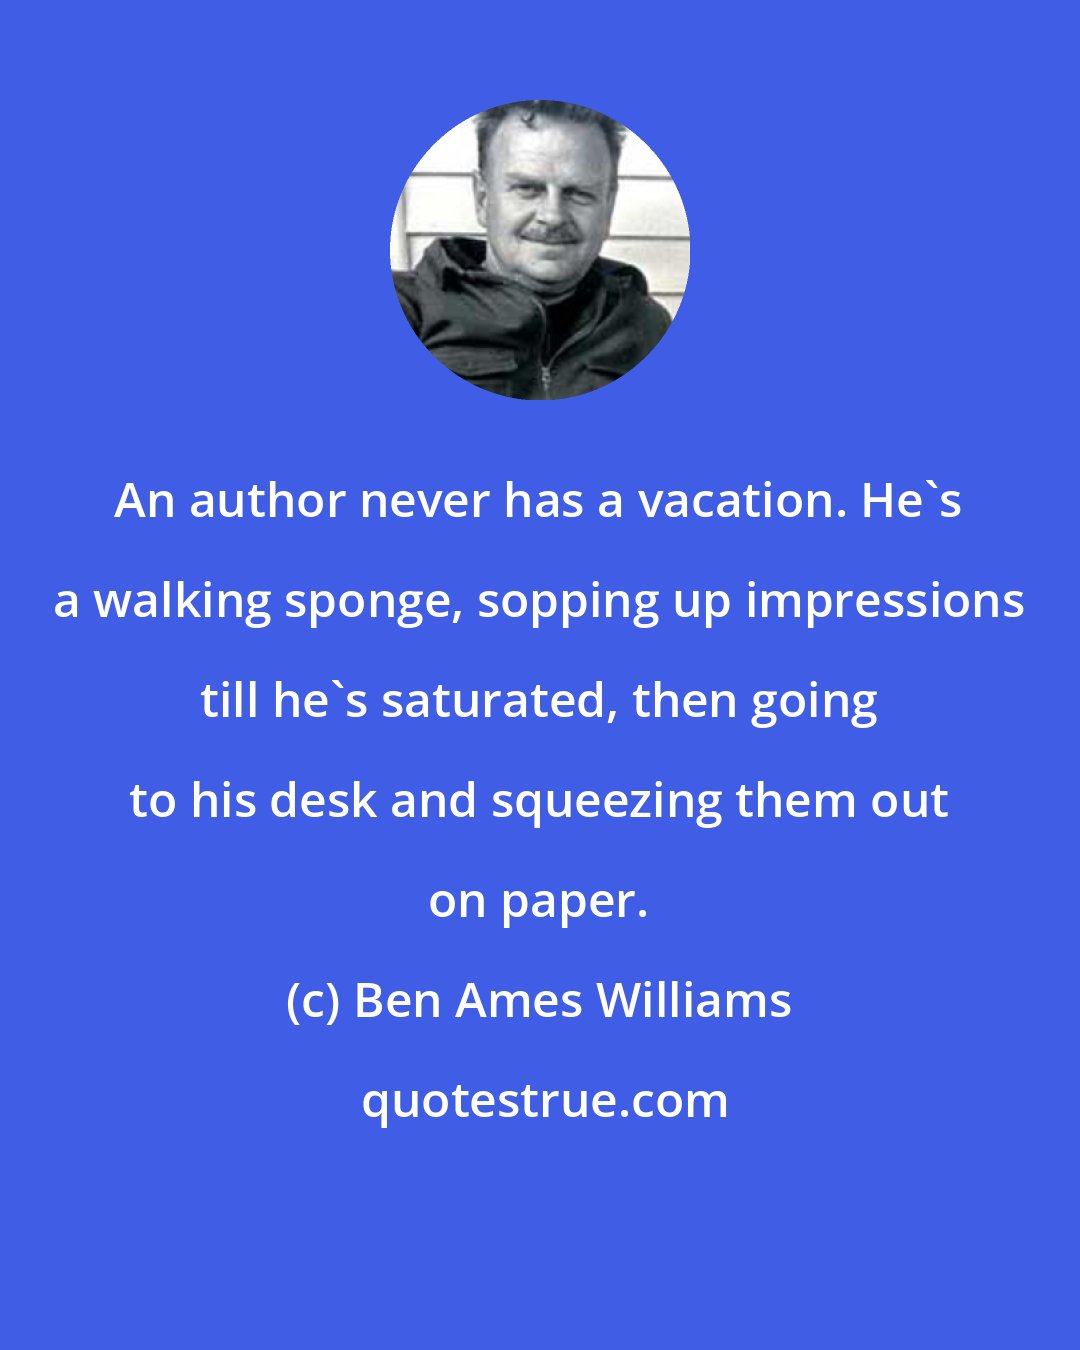 Ben Ames Williams: An author never has a vacation. He's a walking sponge, sopping up impressions till he's saturated, then going to his desk and squeezing them out on paper.